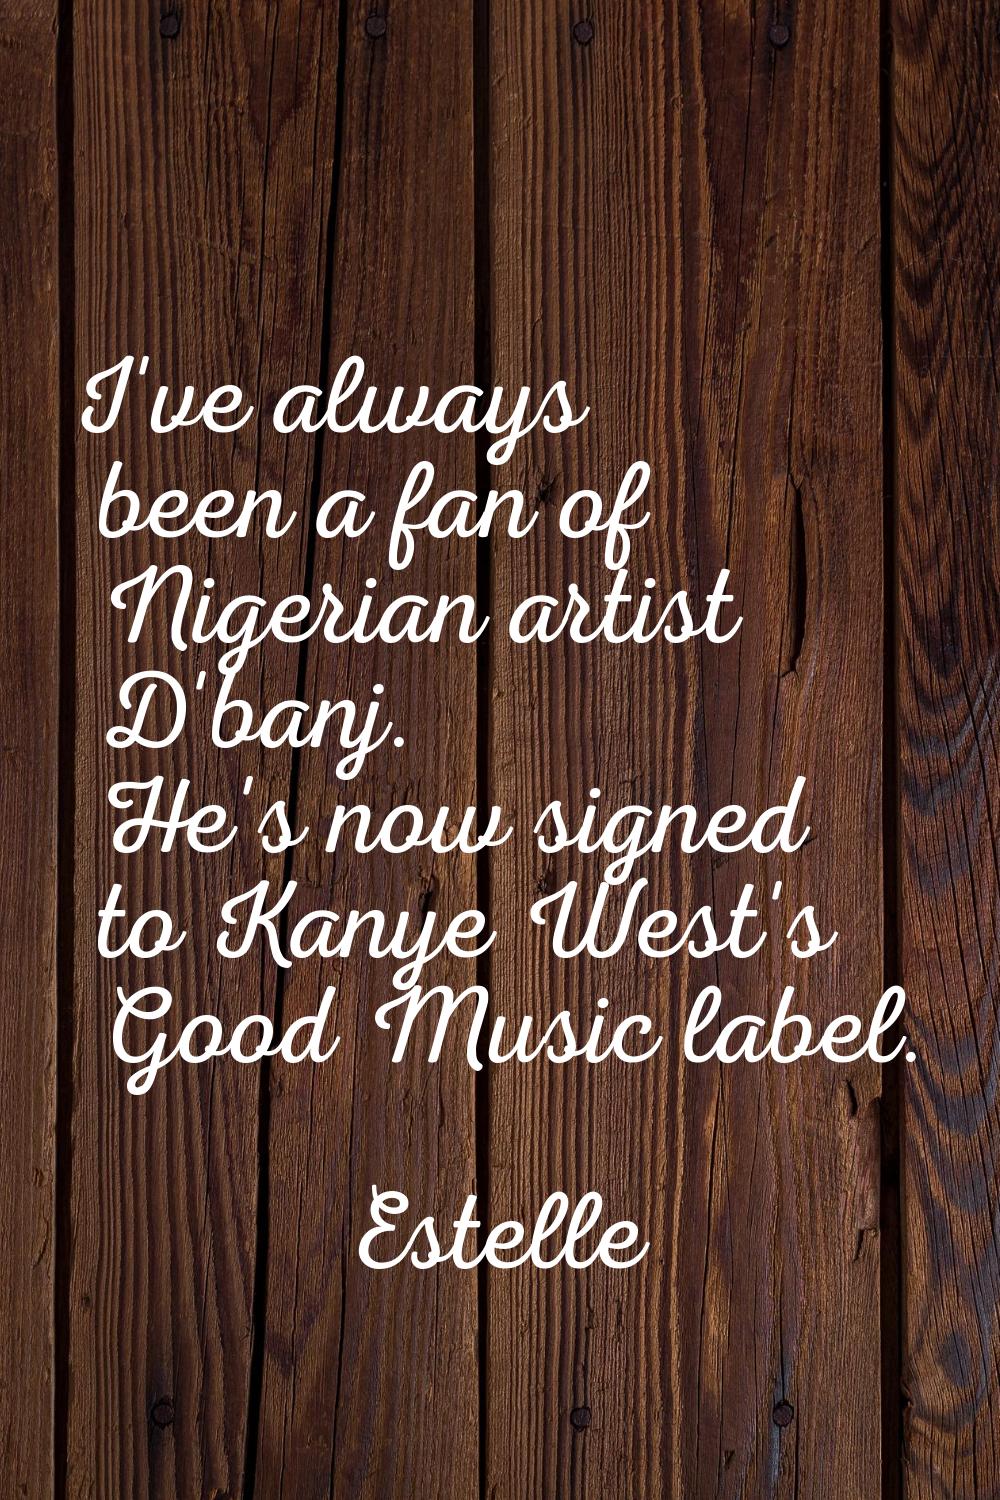 I've always been a fan of Nigerian artist D'banj. He's now signed to Kanye West's Good Music label.